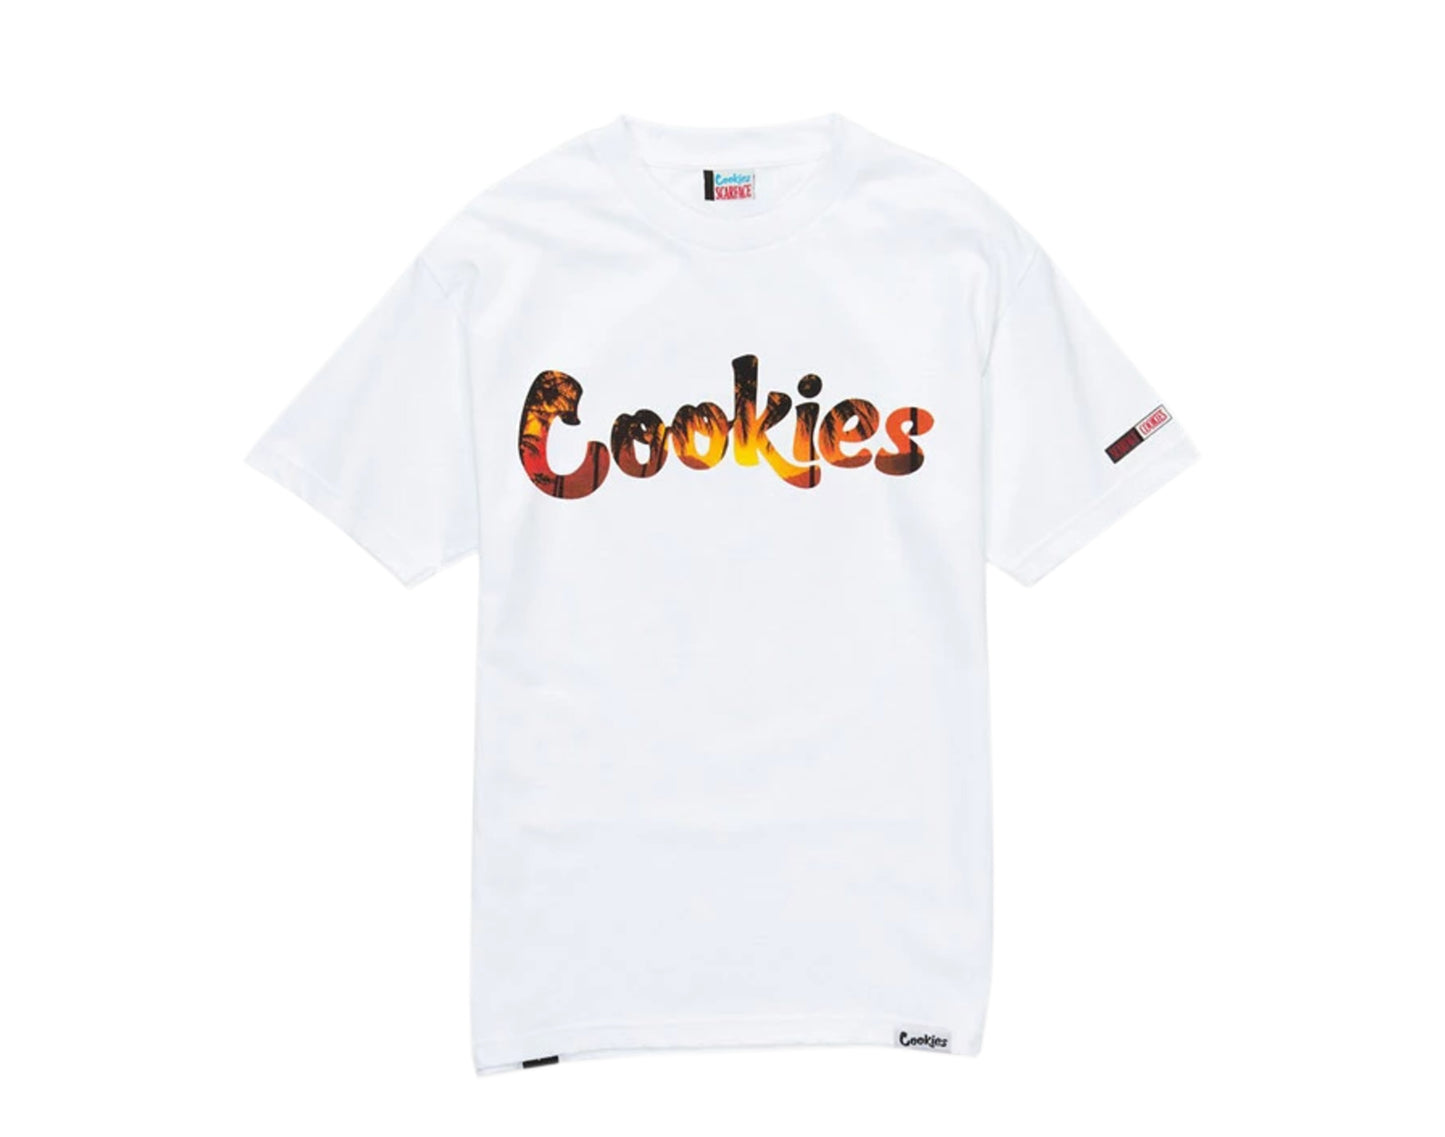 Cookies x Scarface Tropical Sunset White Men's Tee Shirt 1536T3417-WHT